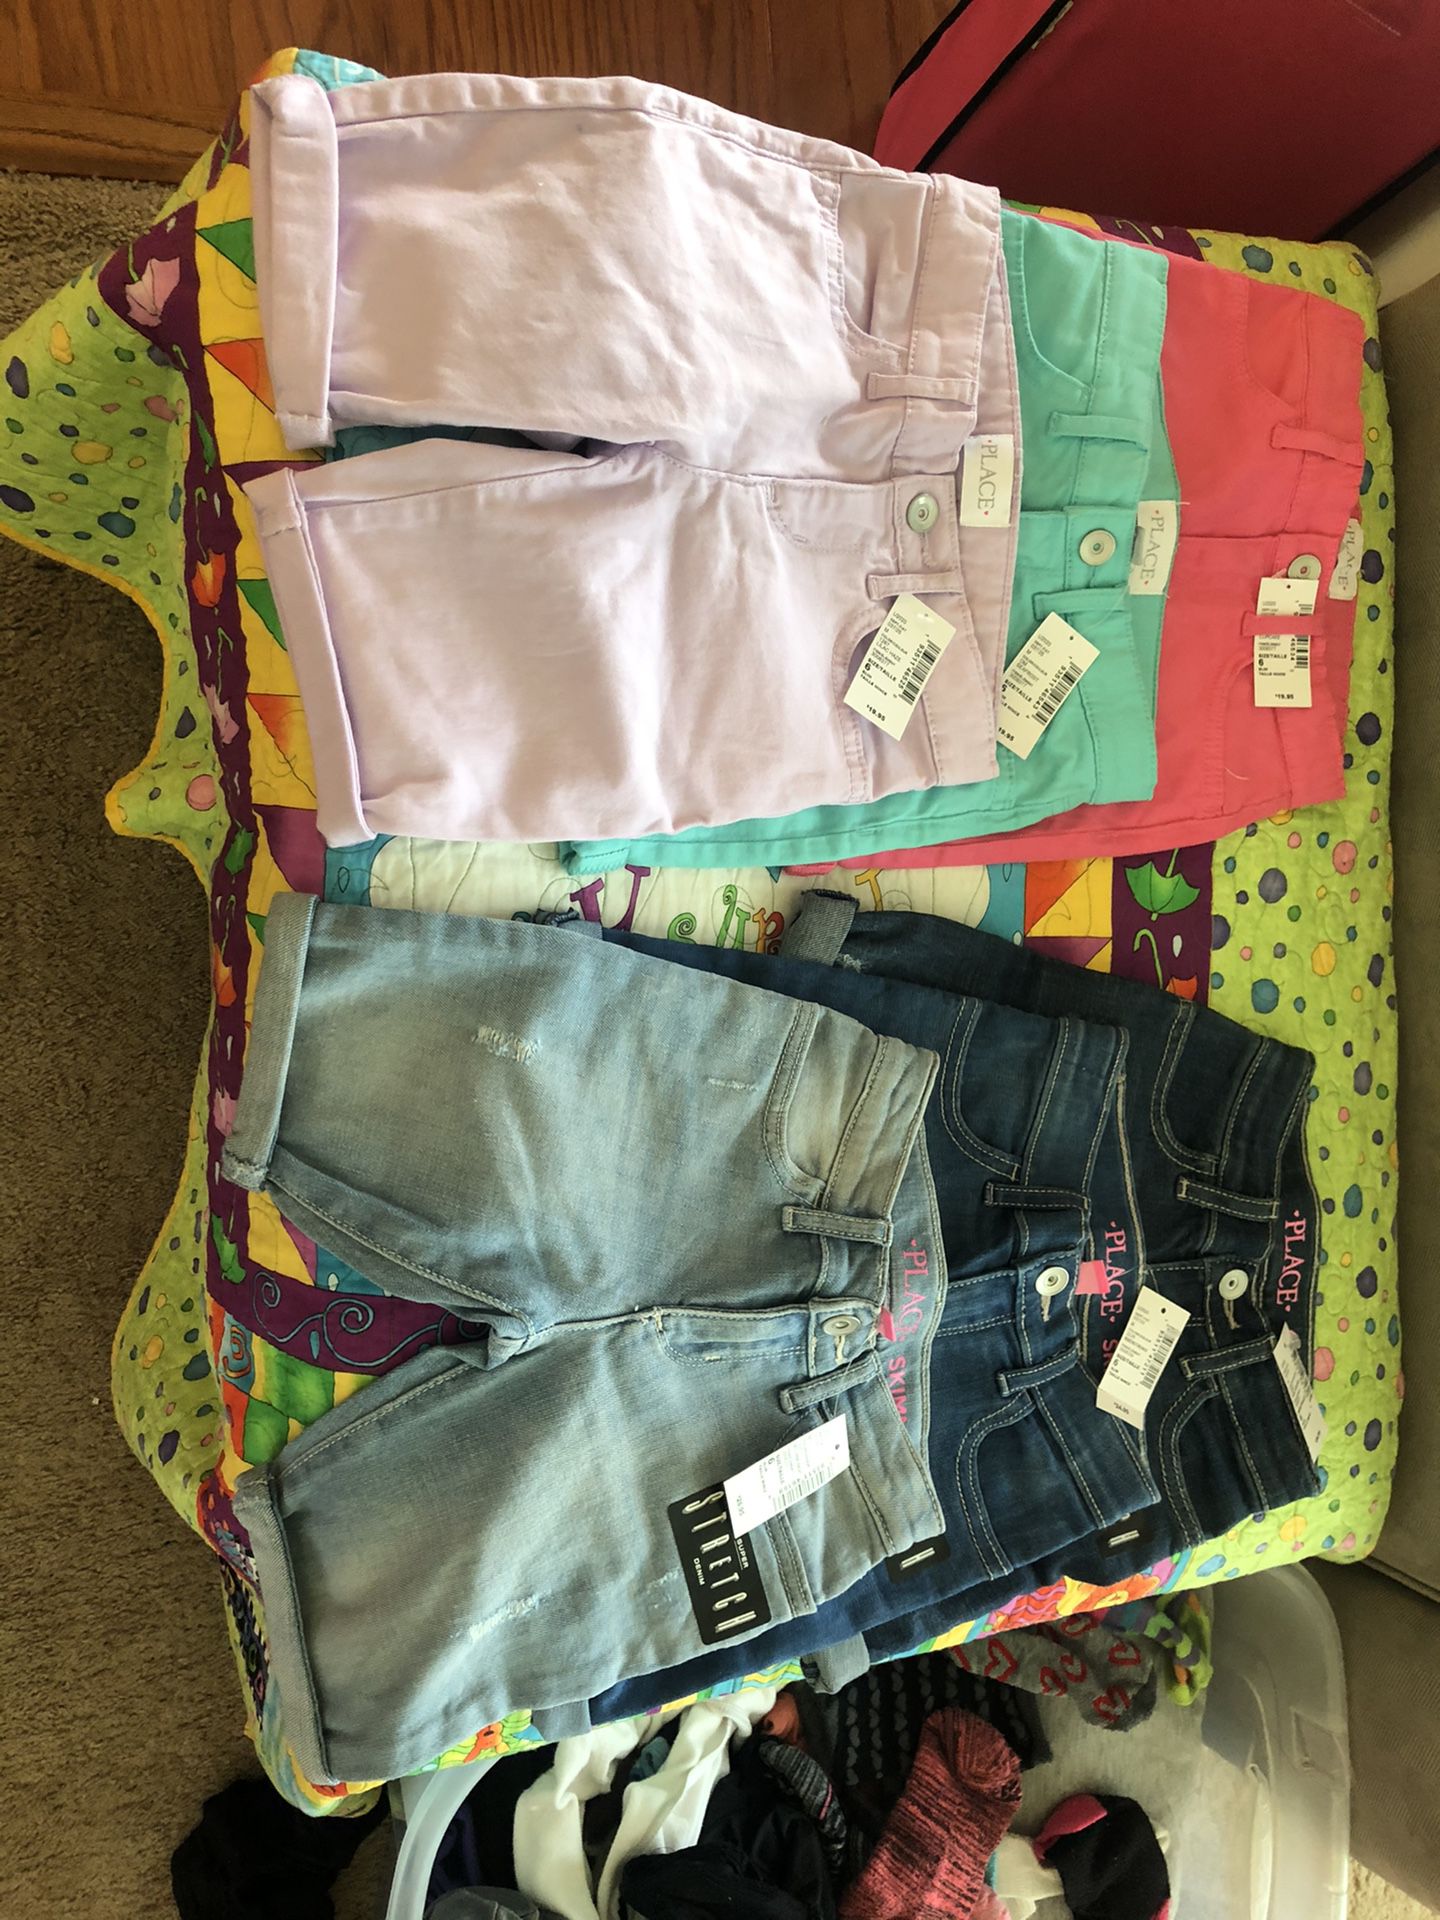 Girls - size 6 slim brand new shorts- denim purple pink seafrost - my daughter can’t fit them - had a growth spurt. Six pairs $55